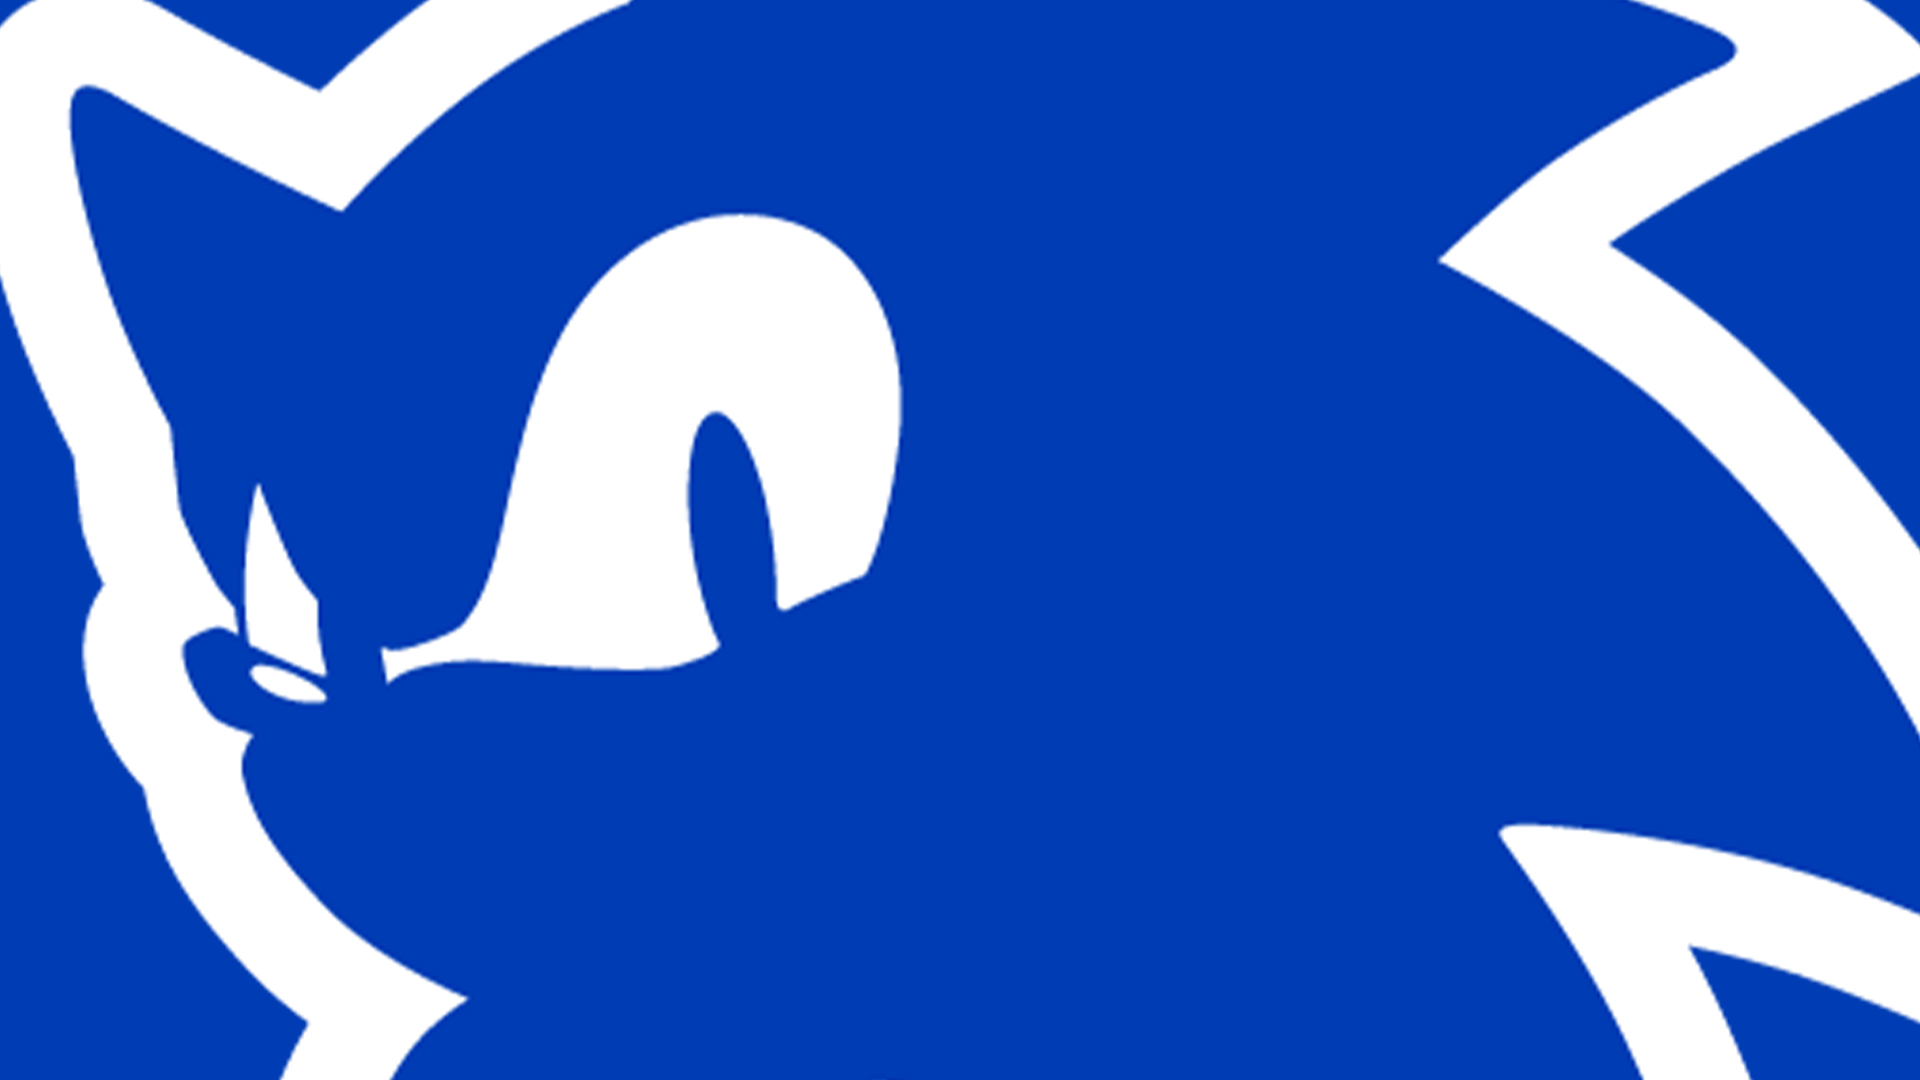 Awesome new Sonic the Hedgehog logo has fans in a spin Creative Bloq